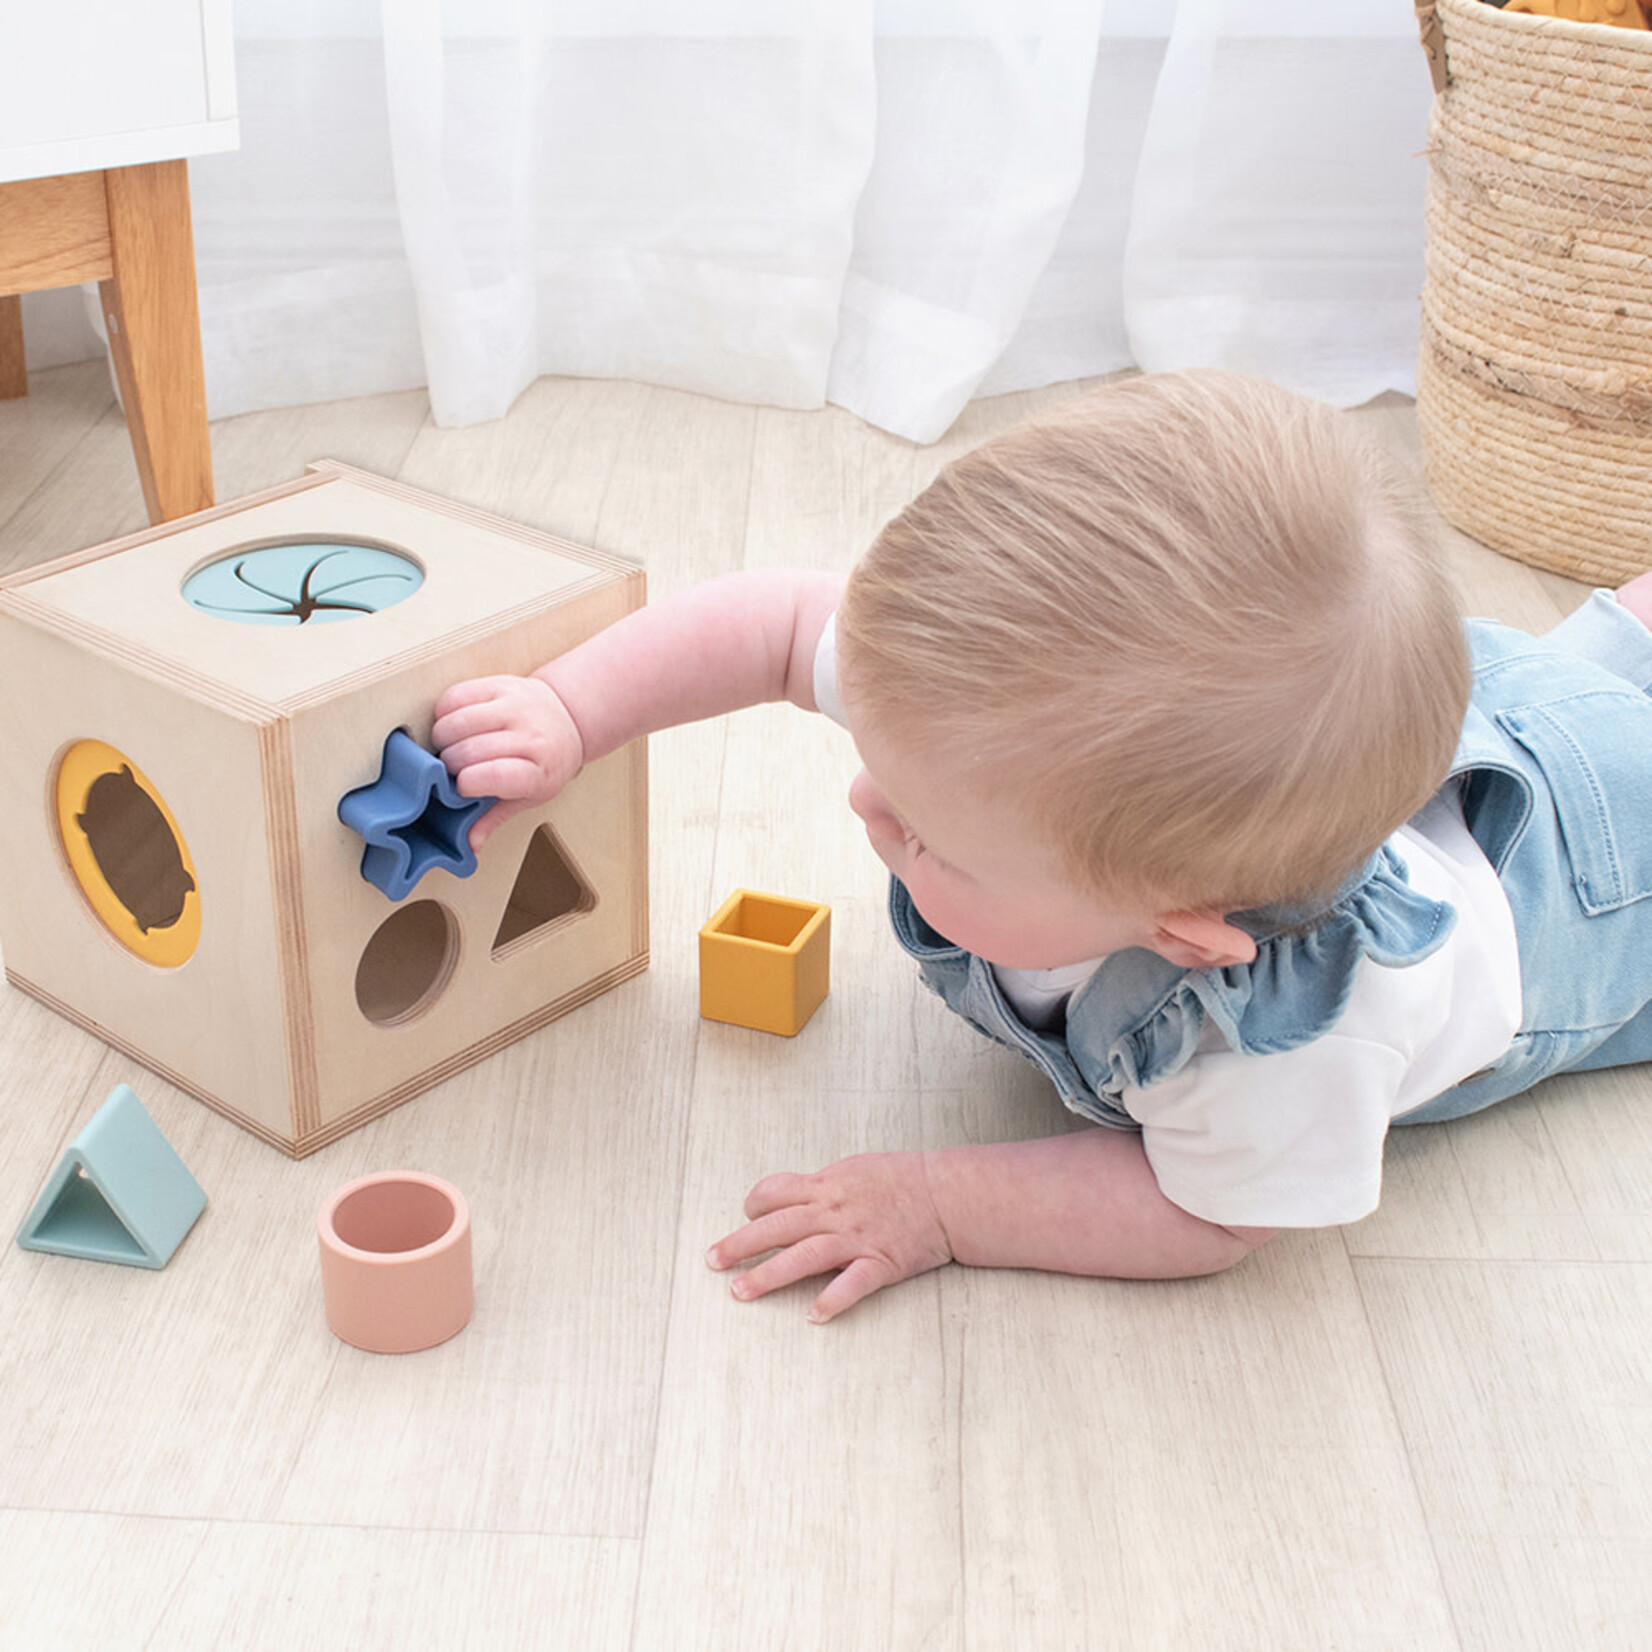 Living Textiles Playground 4-in-1 Sensory Cube